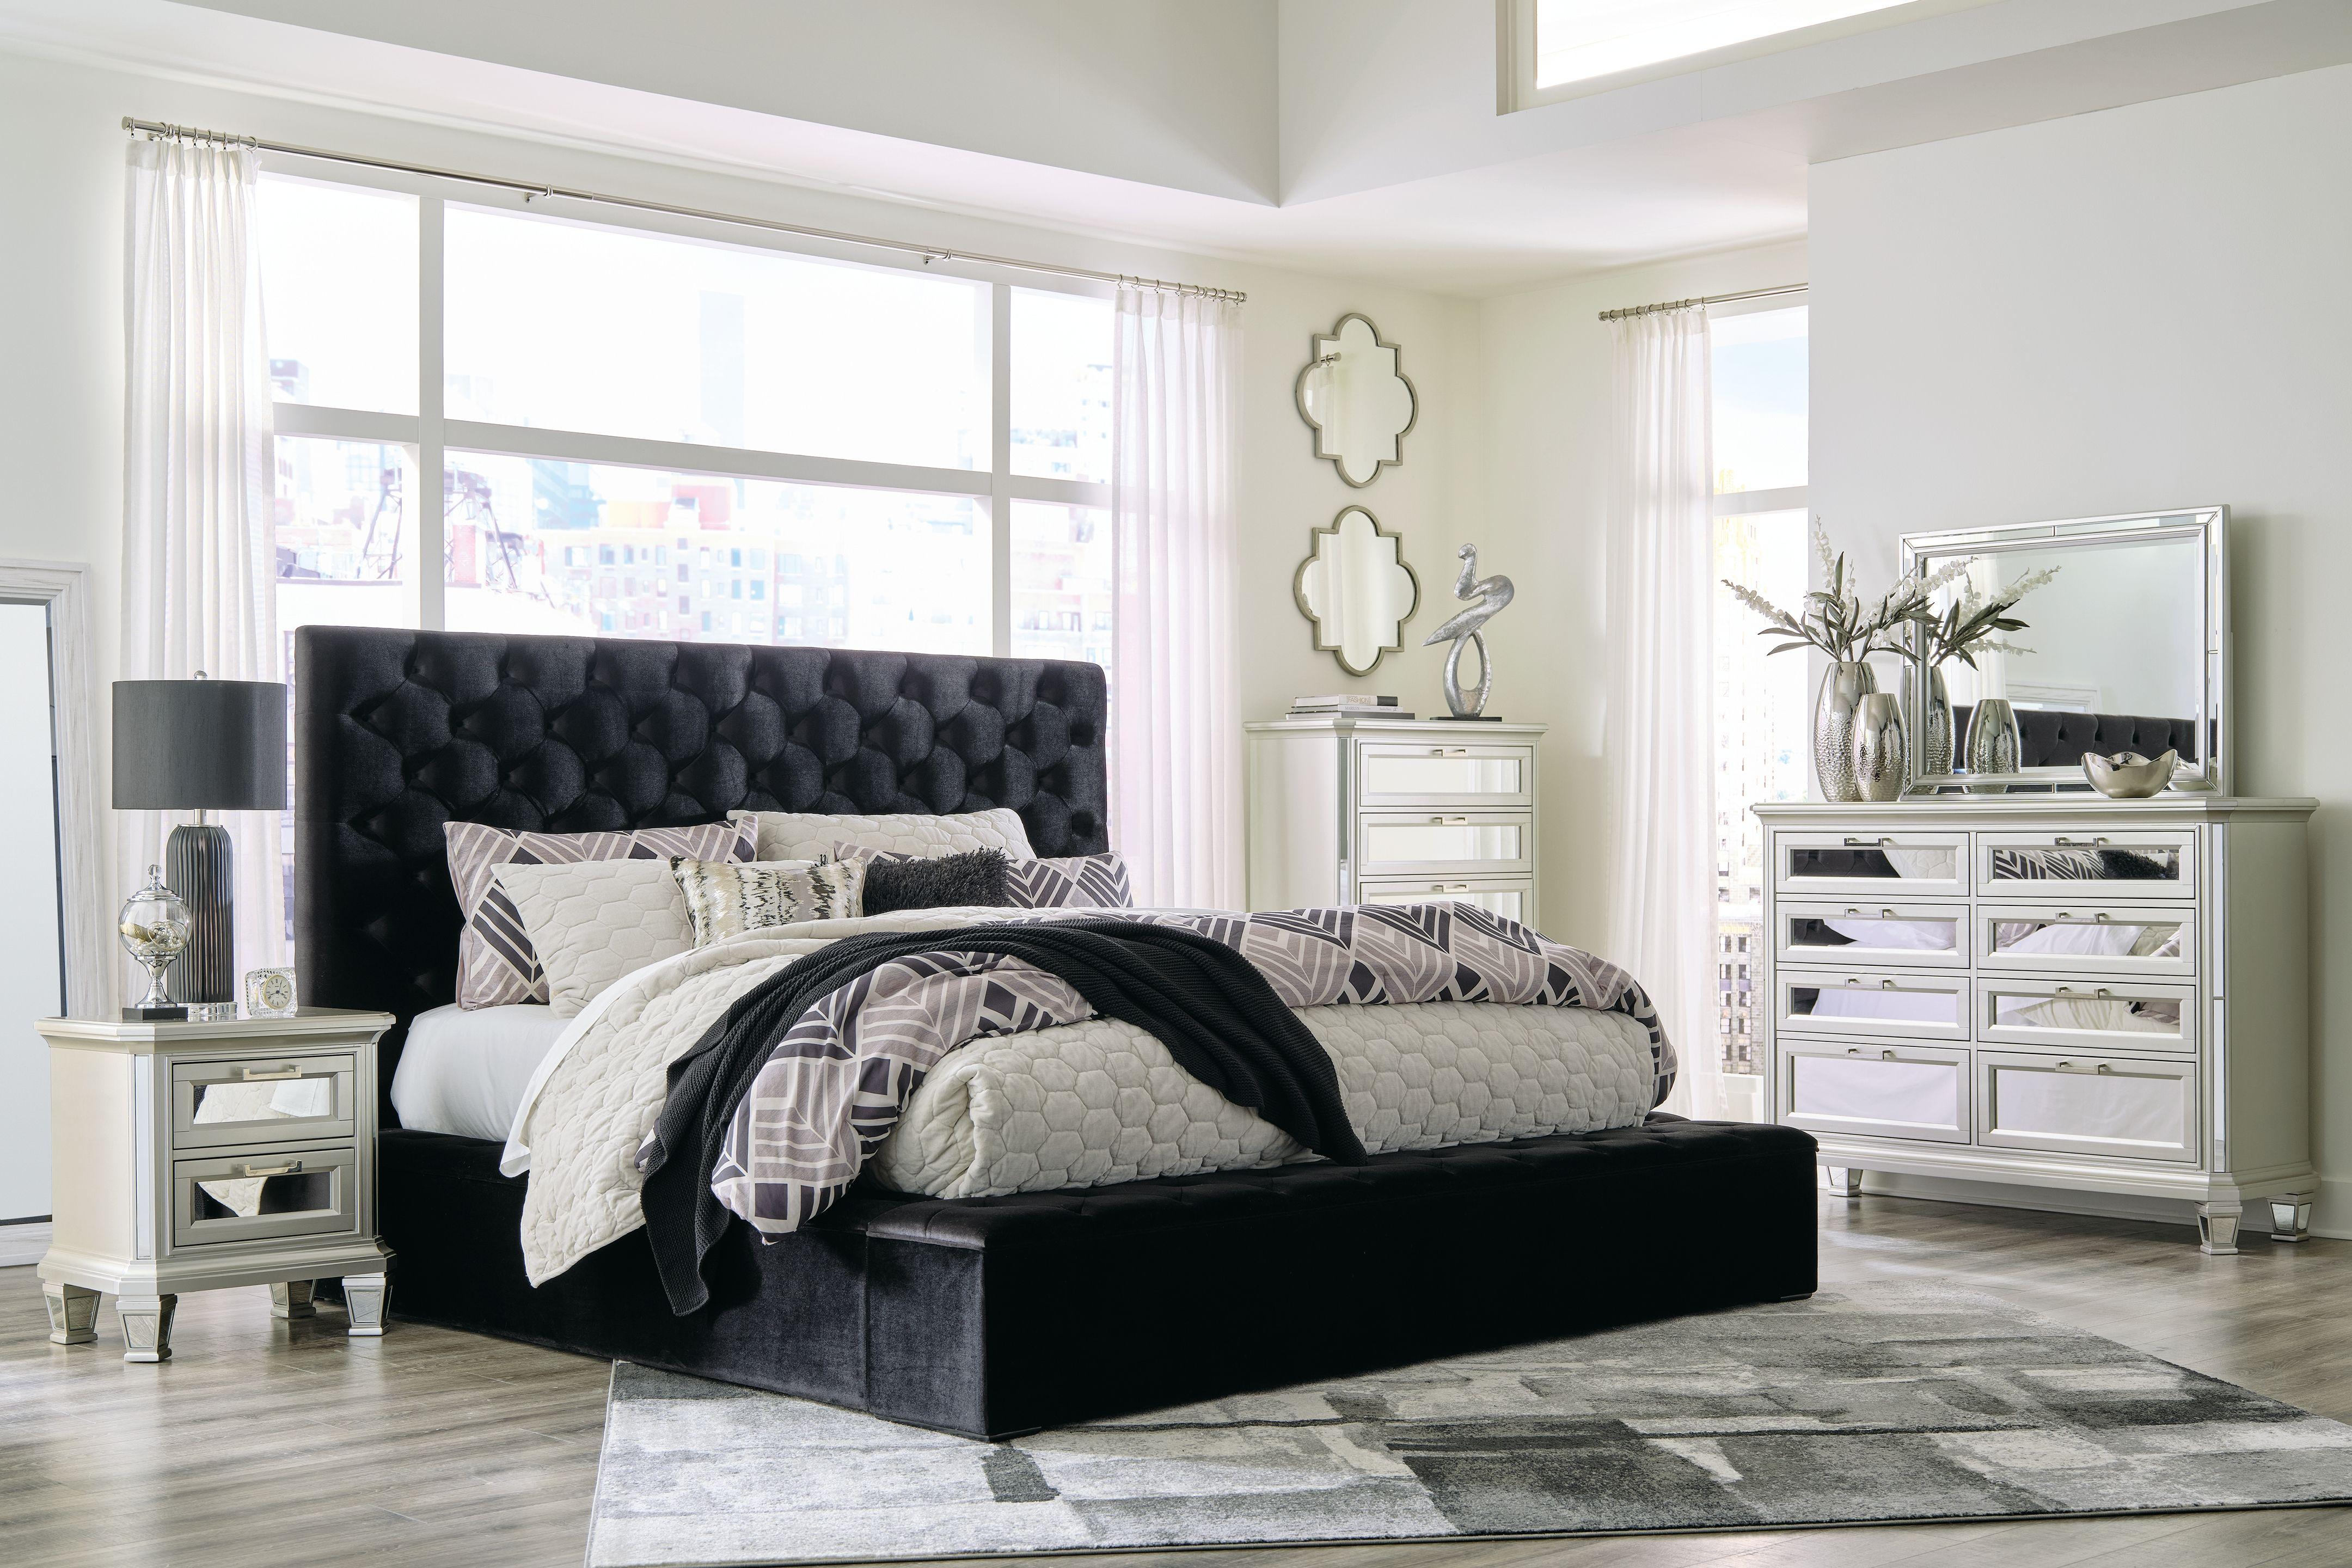 Ashley Lindenfield - Black - 7 Pc. - Dresser, Mirror, King Upholstered Bed With Storage, 2 Nightstands